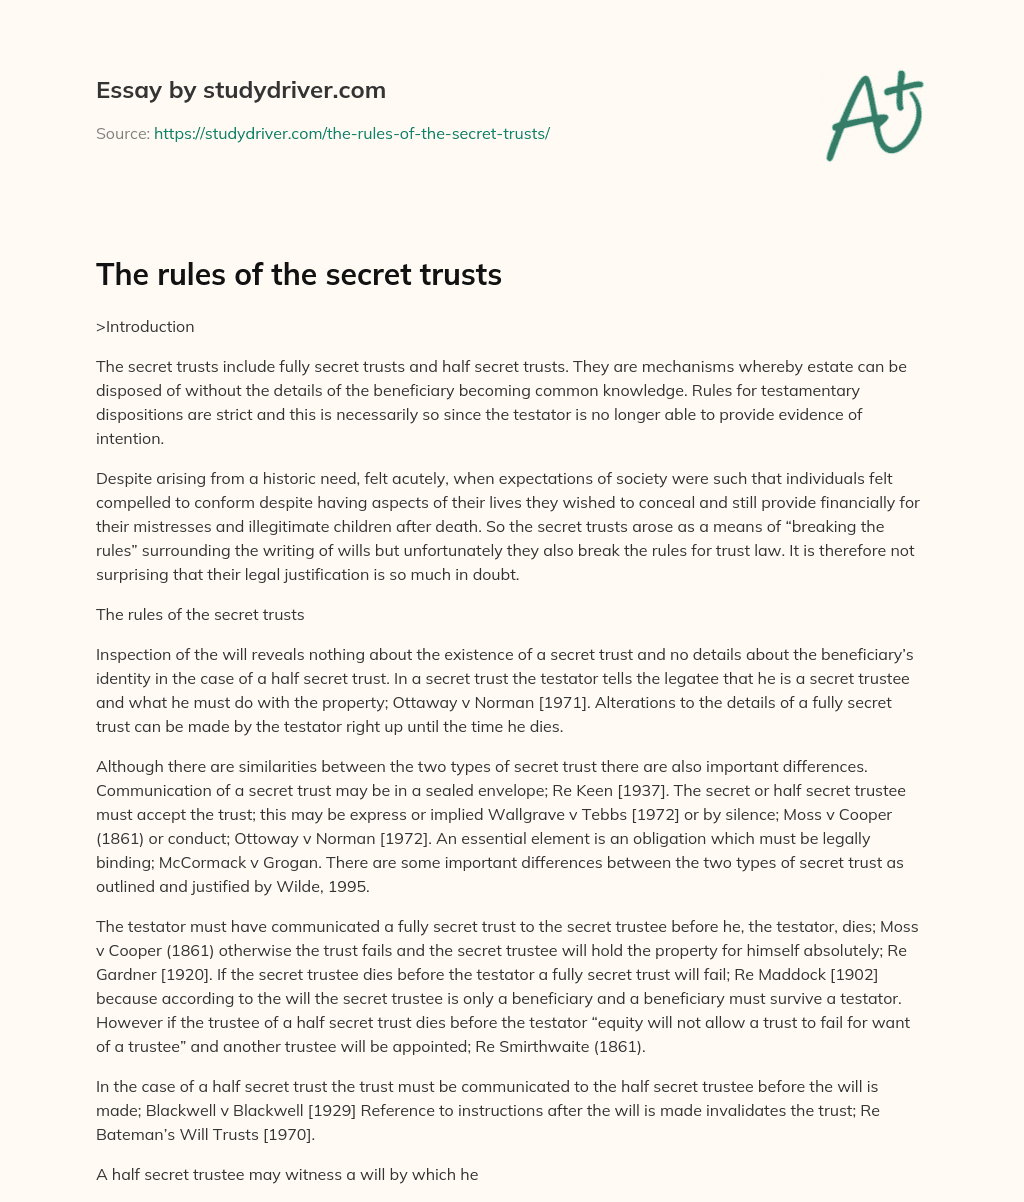 The Rules of the Secret Trusts essay